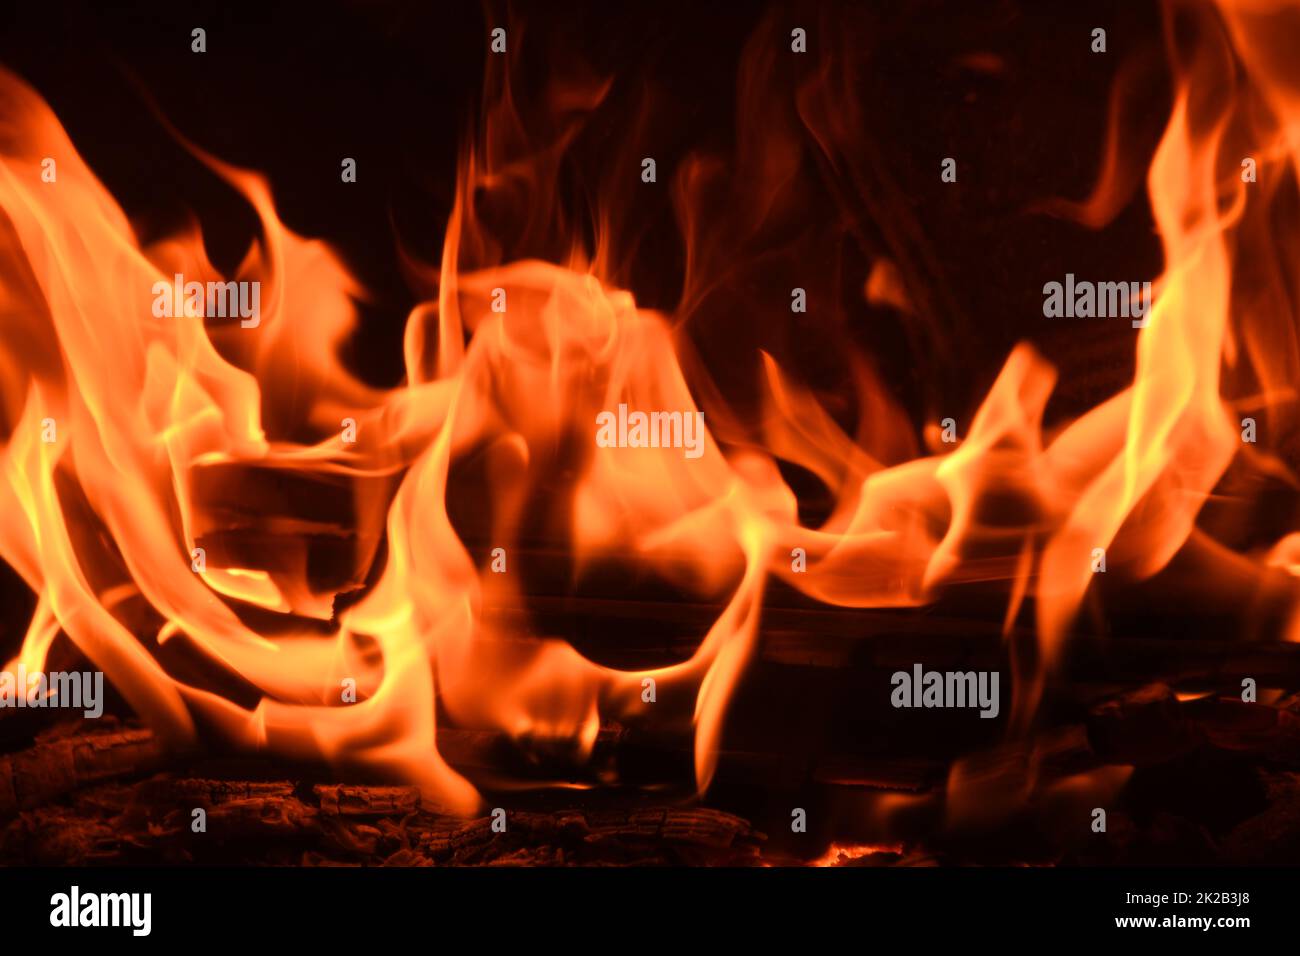 Fier background stock photo. Image of winter, heating - 2160458